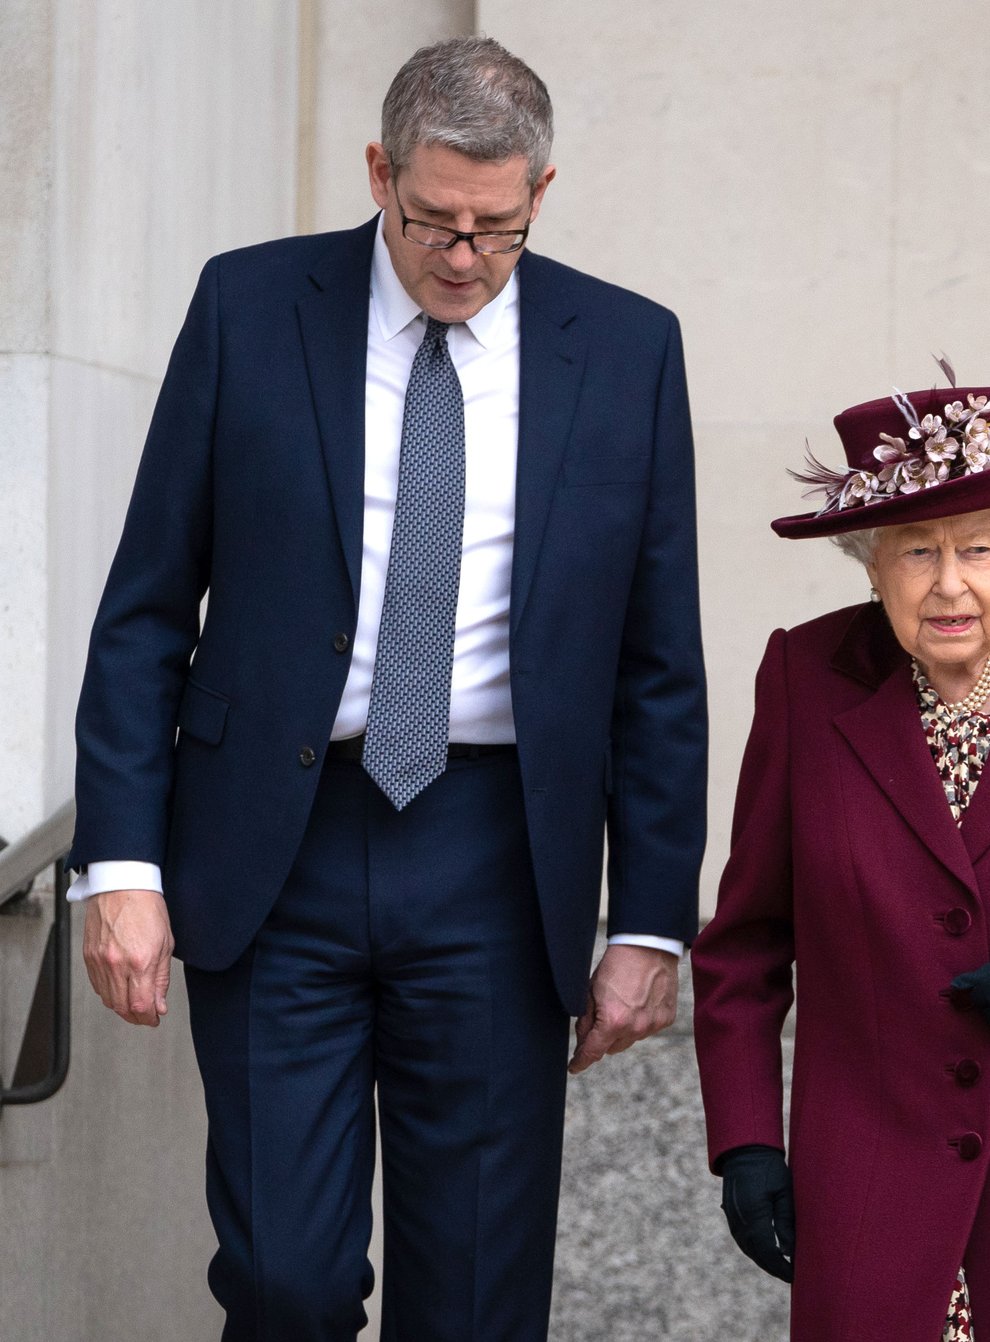 The Queen with Baron Parker who has been announced as the new Lord Chamberlain